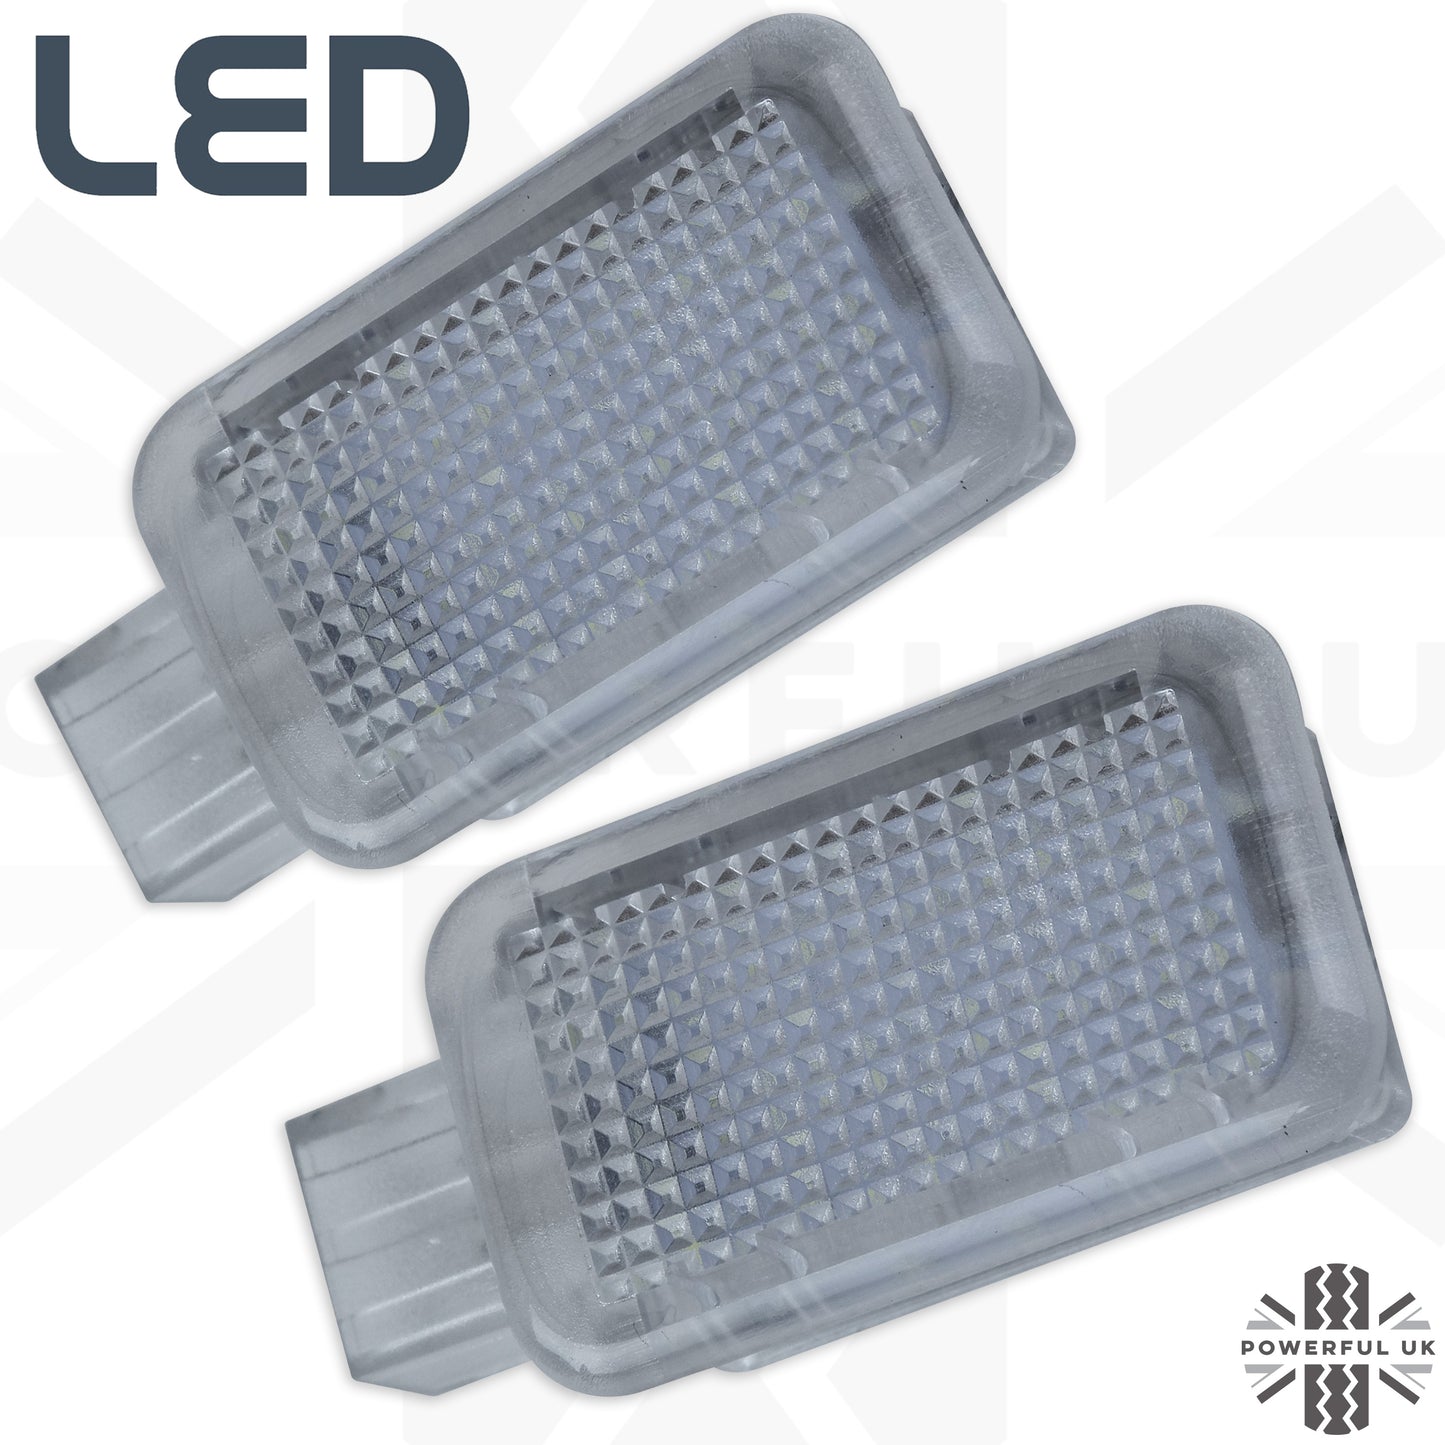 WHITE-RED-BLUE LED interior Footwell ambient lamp upgrade for Range Rover Sport L494  (2pc)